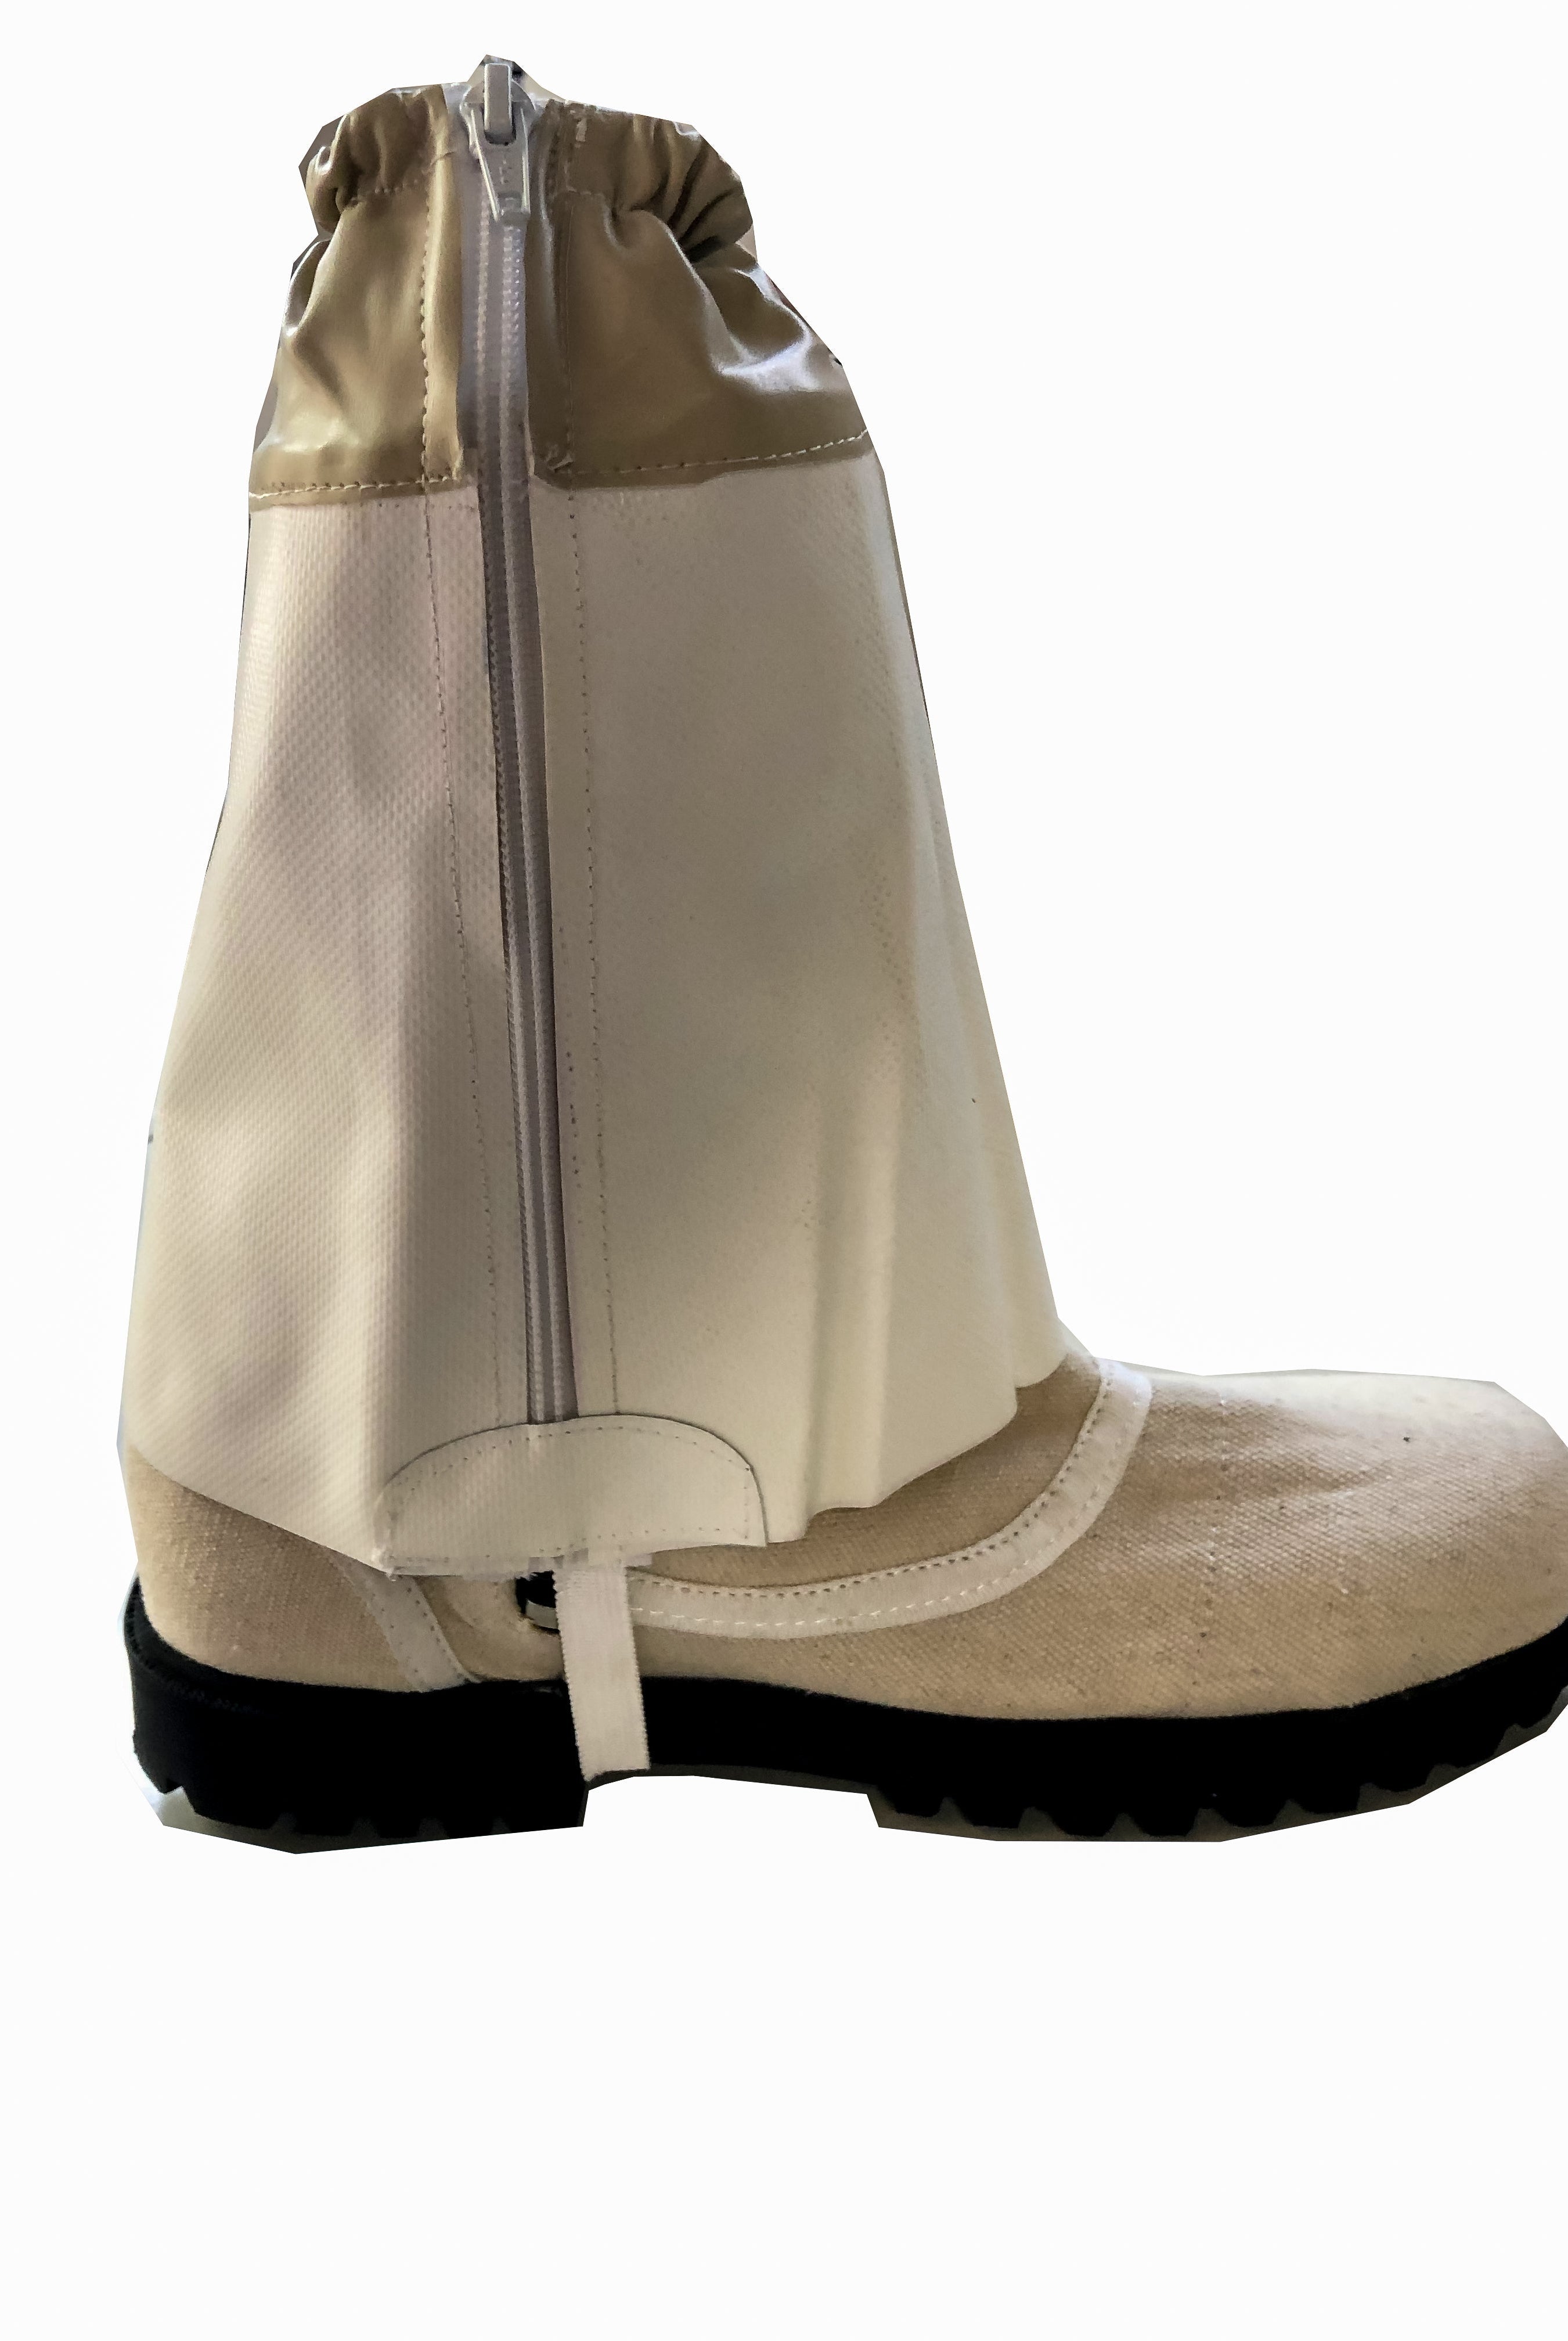 Multi Purpose Ankle Protector For Work/Beekeeping  Gear